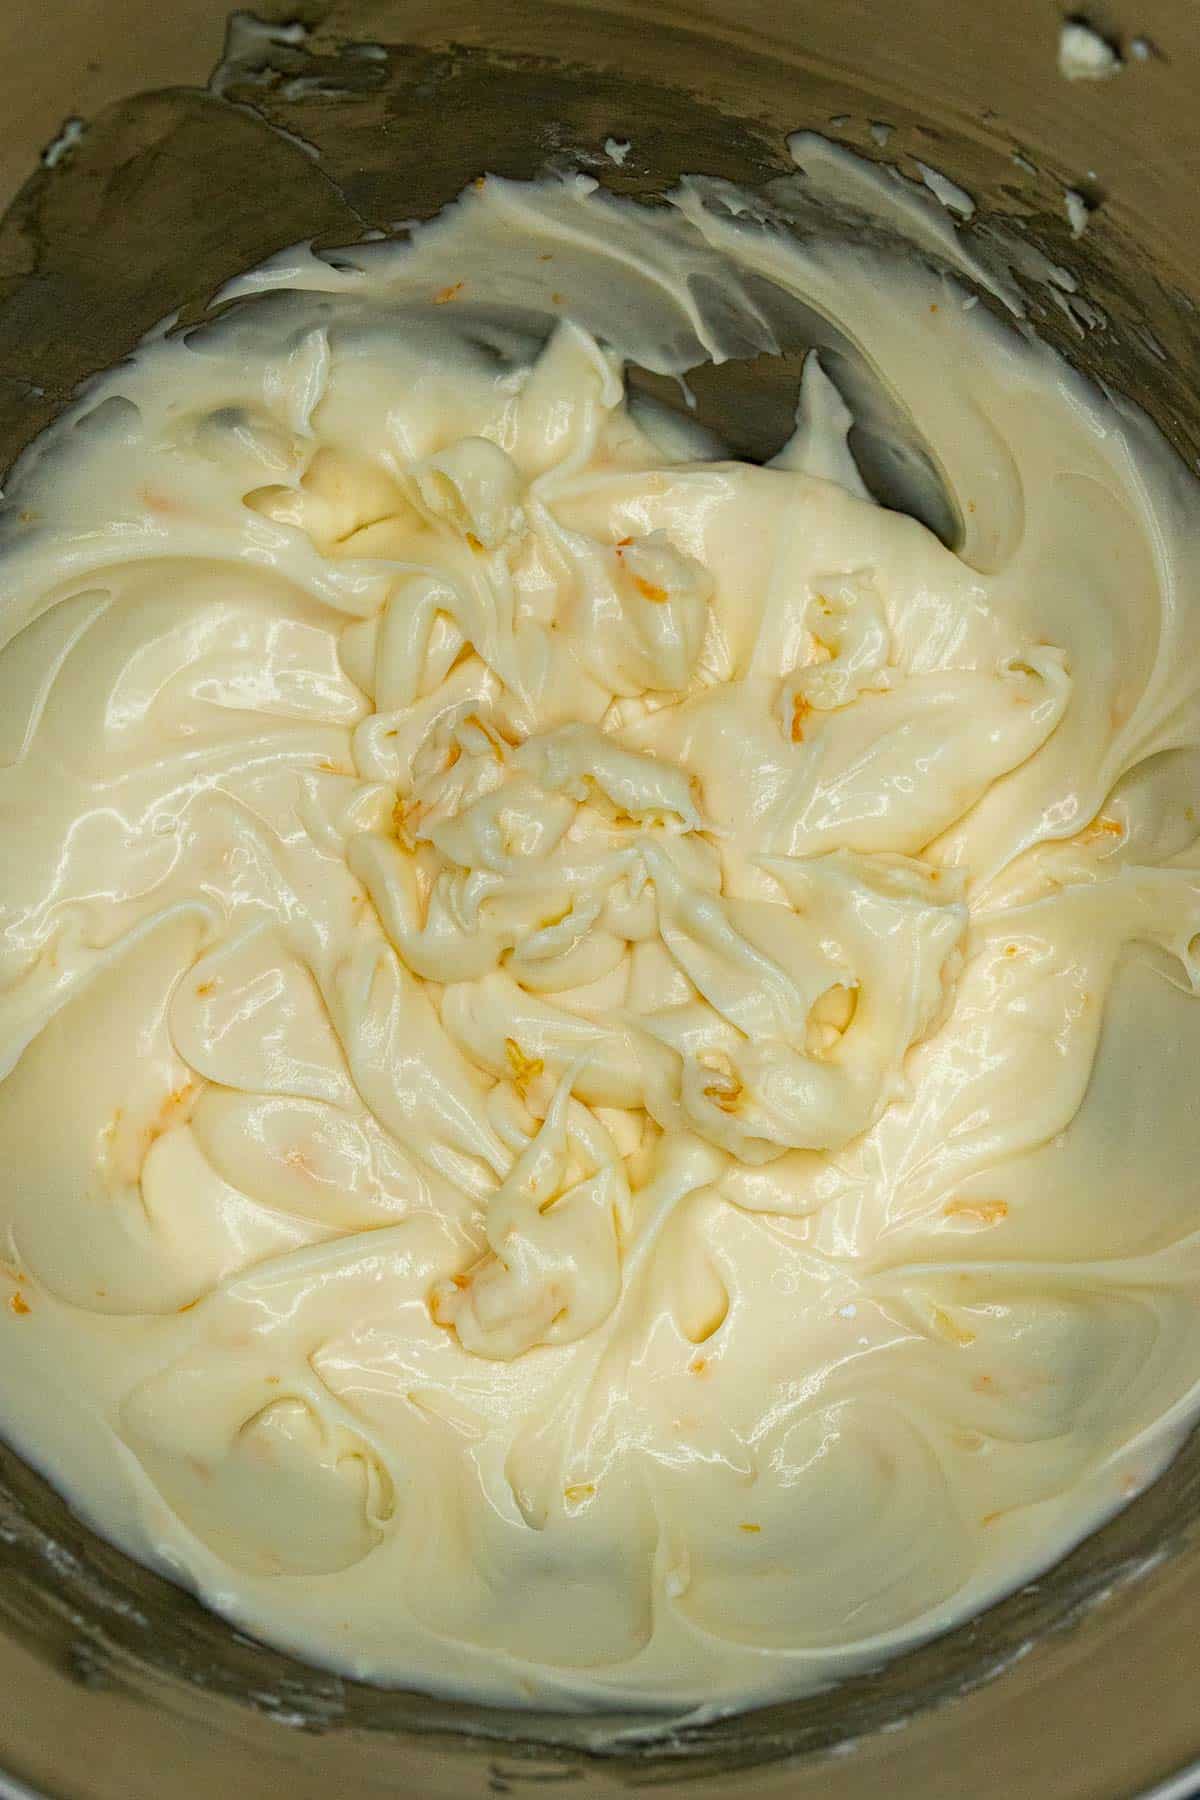 Meyer lemon juice, zest, and vanilla added to cream cheese frosting.